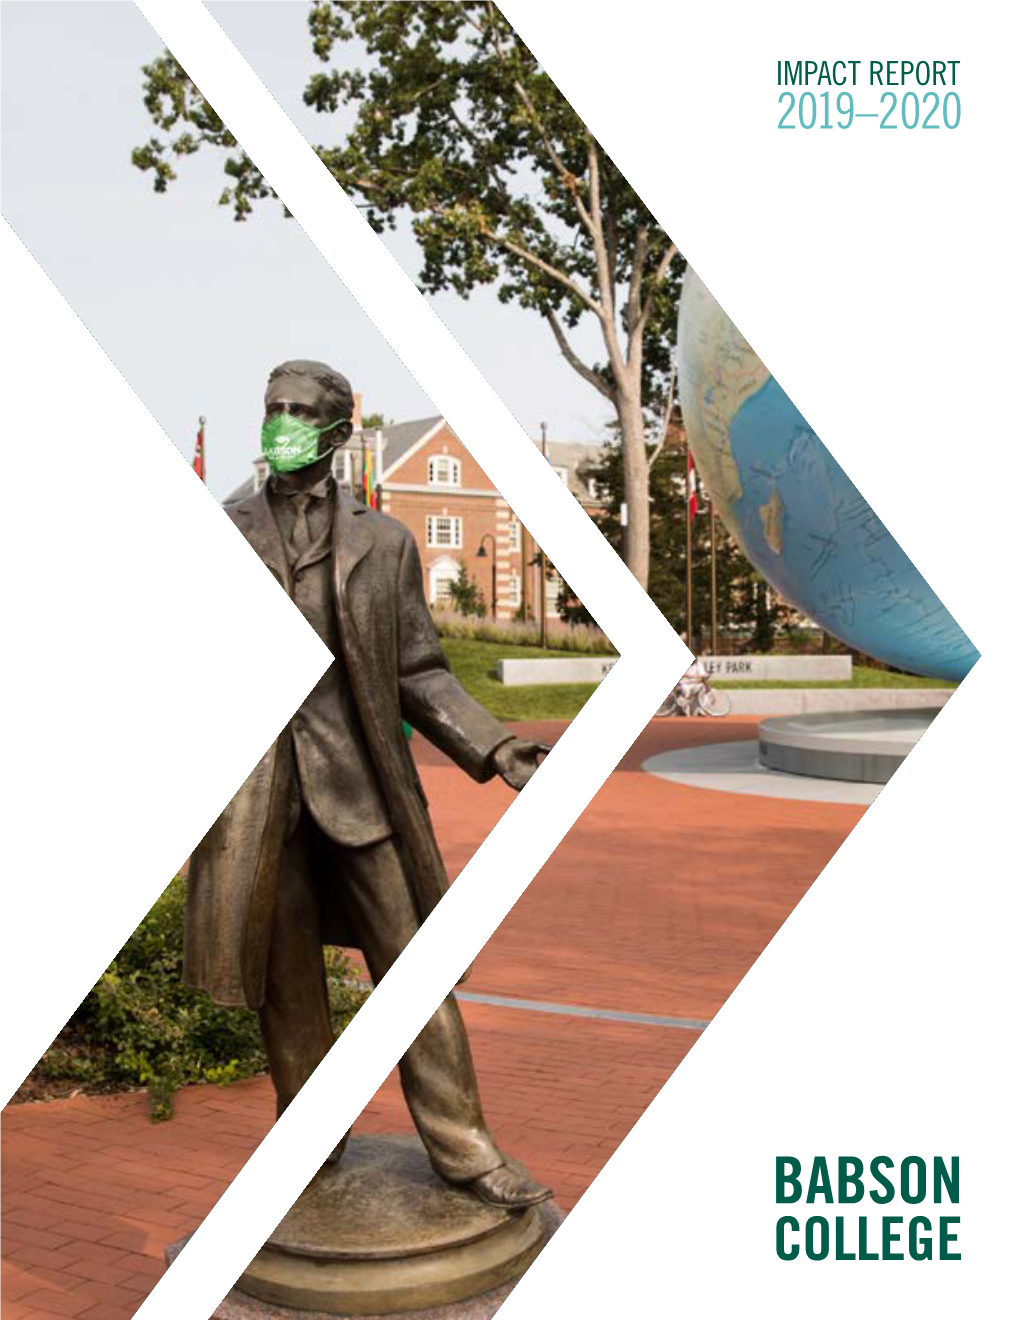 Babson College Impact Report 2019-2020 (Pdf)